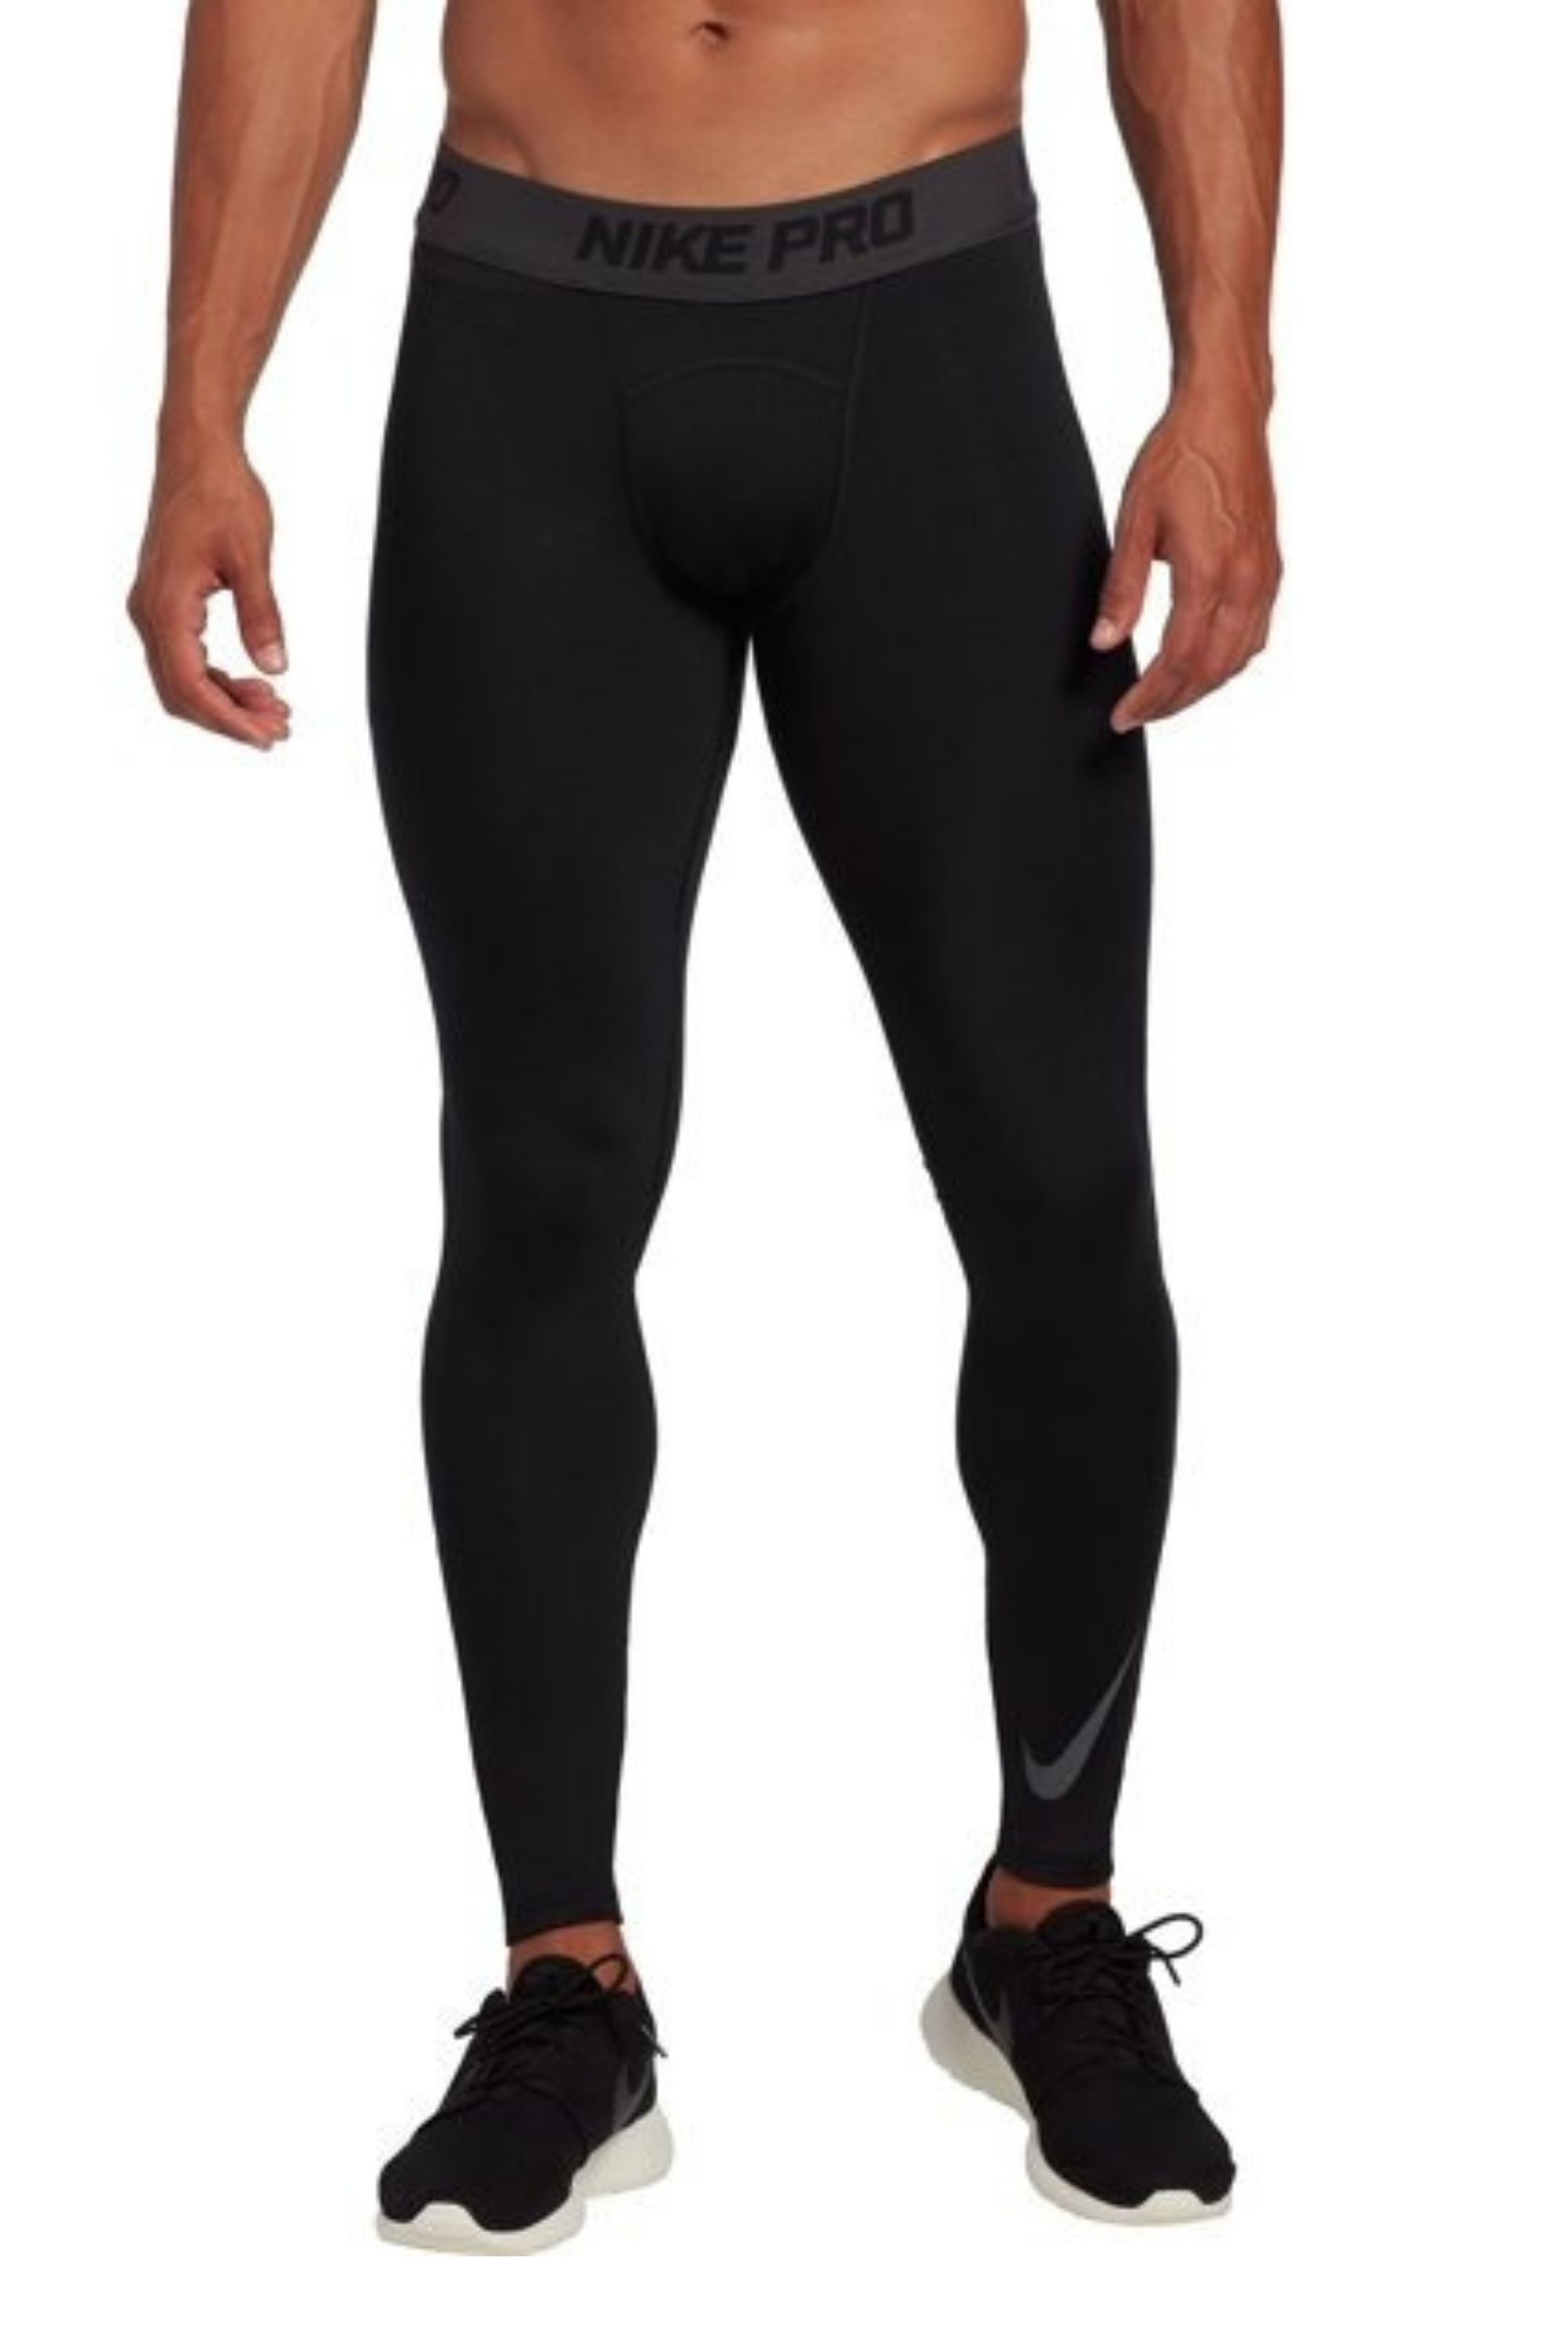 Mens Thermal Compression base layer pants running skin tight cold wear leggings 